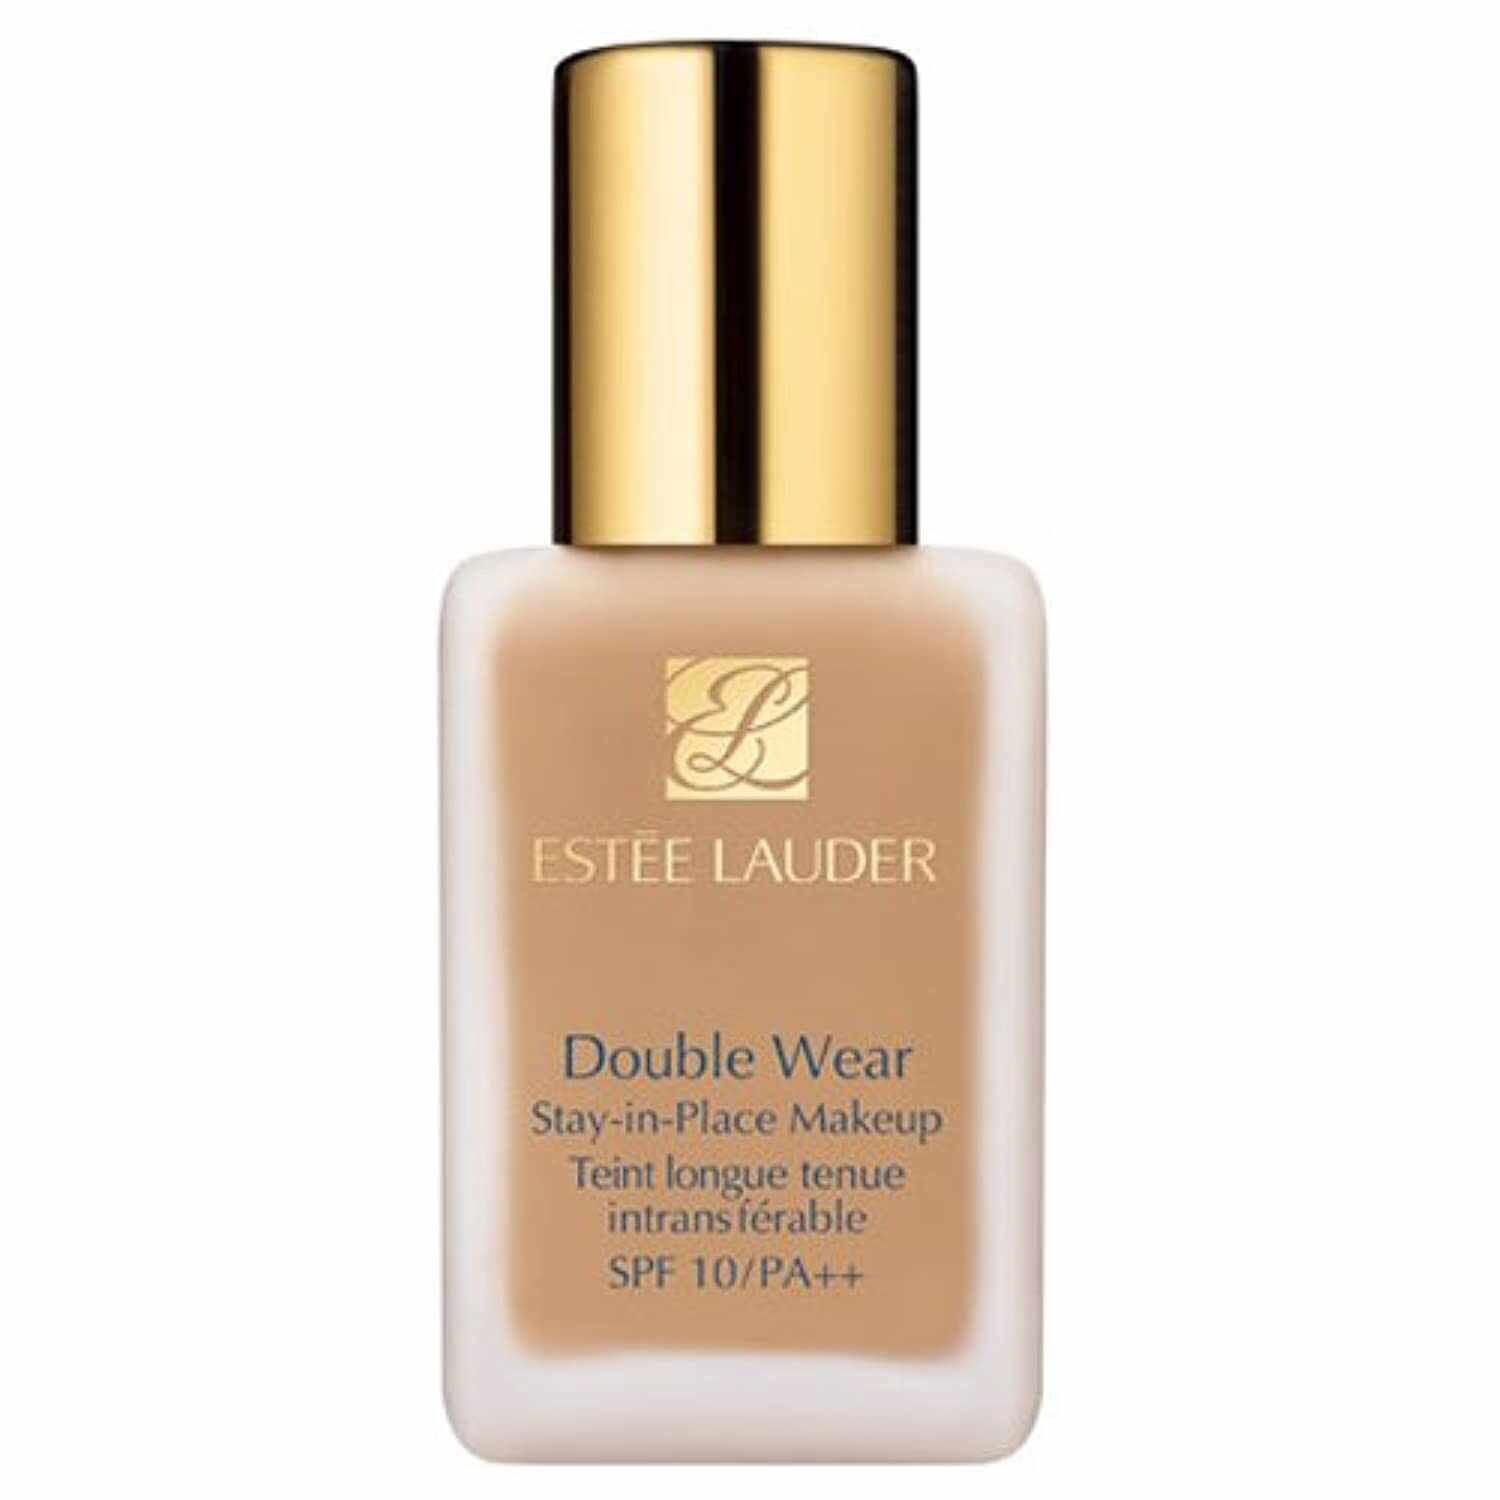 Estee Lauder, Double Wear - Stay-In-Place Makeup, Paraben-Free, Waterproof, Transfer-Resistant, Liquid Foundation, 1W2, Sand, SPF 10, 30 ml